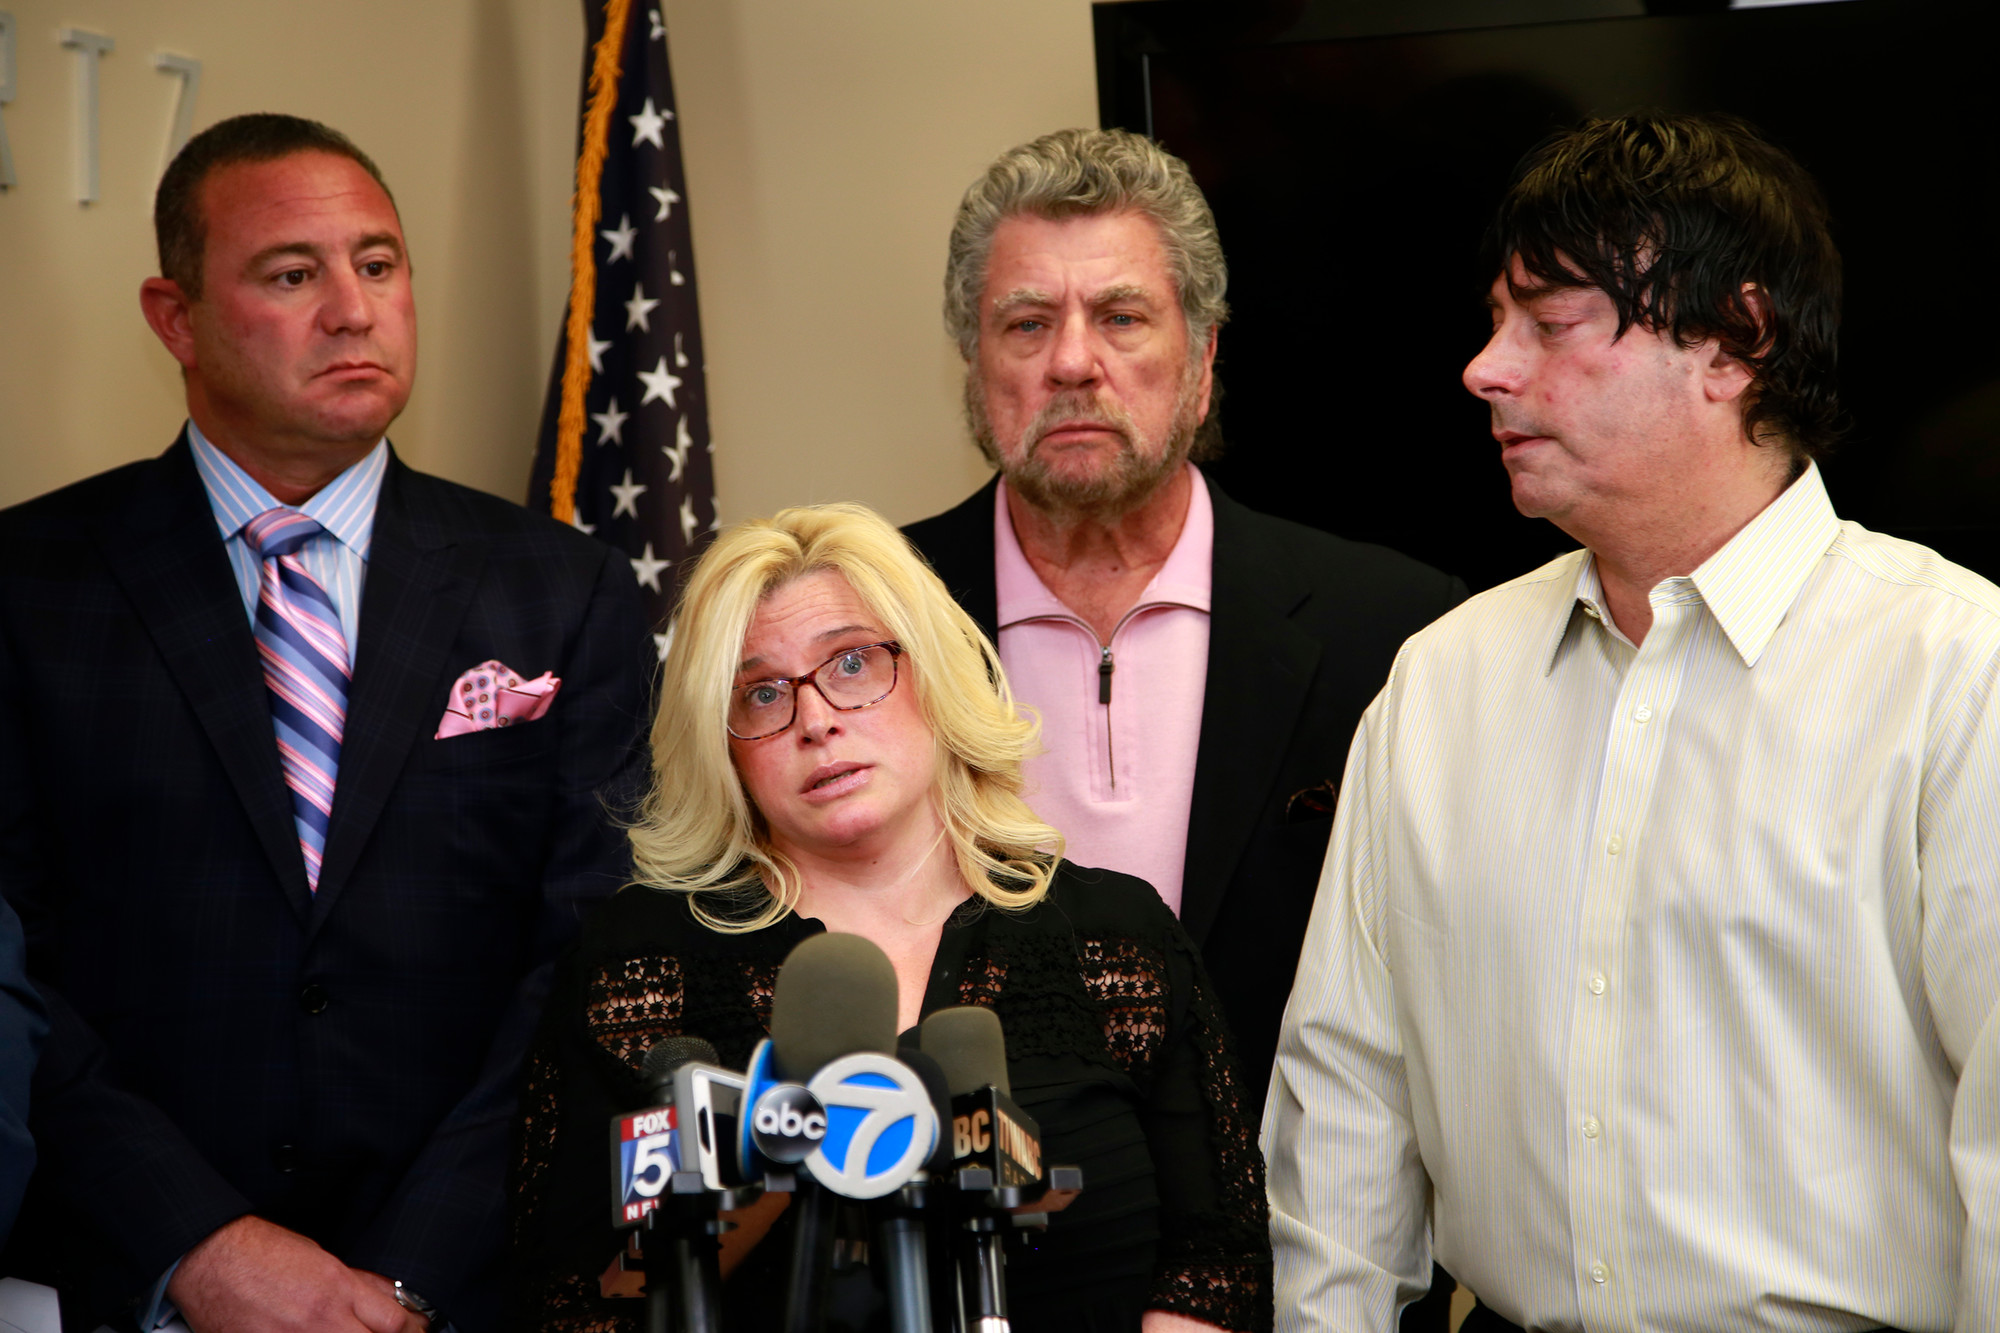 Kim Greengus, the alleged victim’s mother, front, addressed the media Thursday with attorney Brad Gerstman, left, private investigator Les Levine and her husband, Todd Greengus.